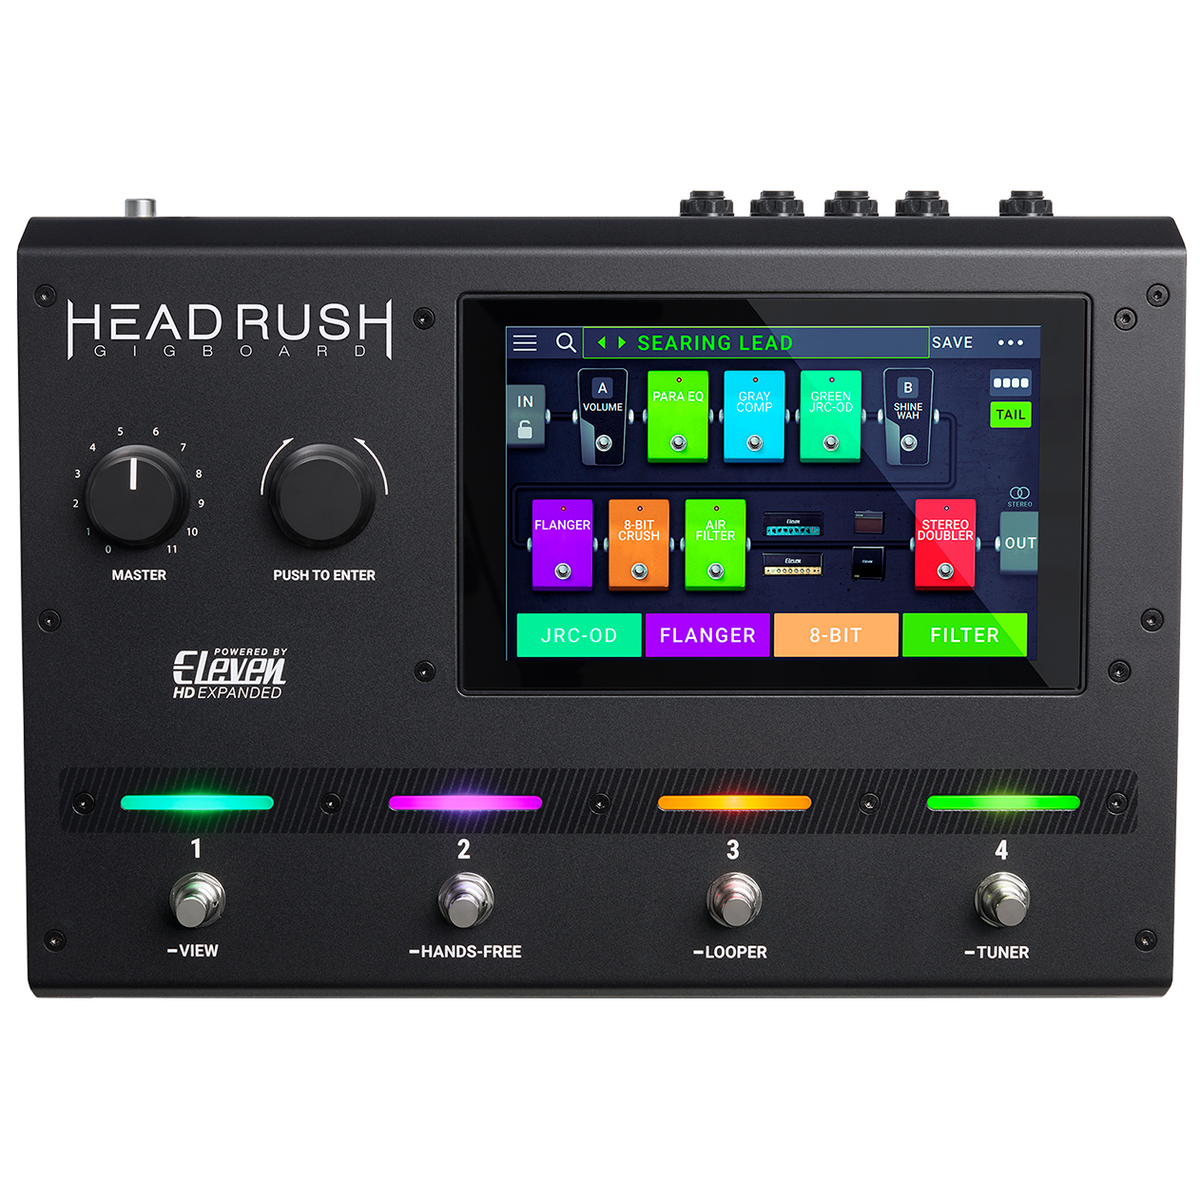 Headrush GIGBOARD Compact Guitar FX and Amp Modeling Processor with Color  Touch Screen